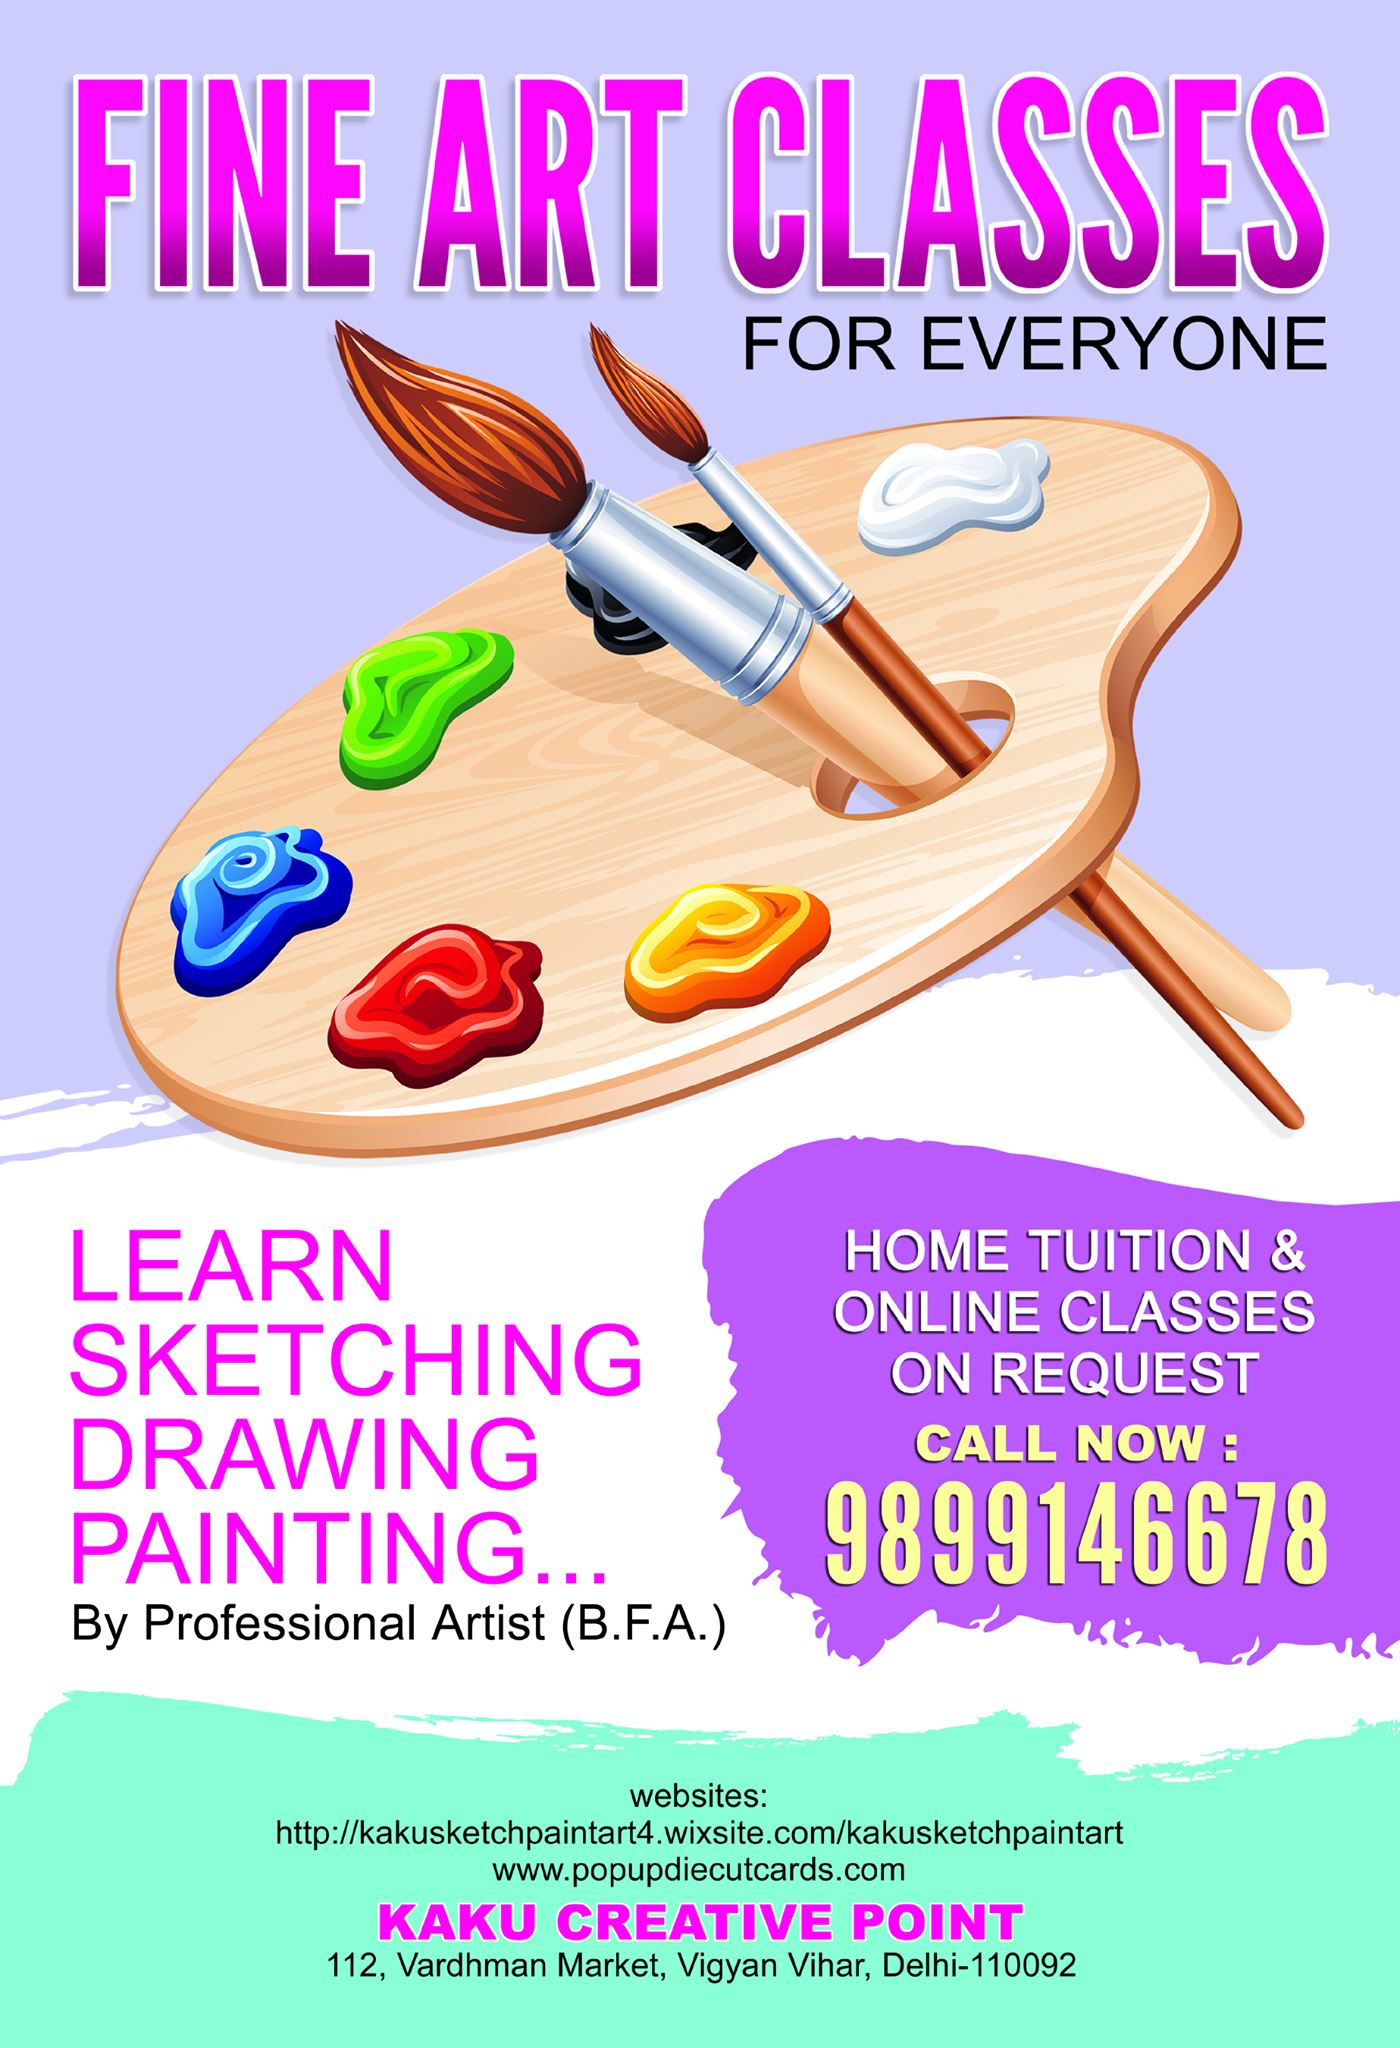 HOME TUTOR FOR SKETCHING, DRAWING, PAINTING | LEARN FINE ART BASICS- 9899146678Education and LearningPrivate TuitionsCentral DelhiConnaught Circus